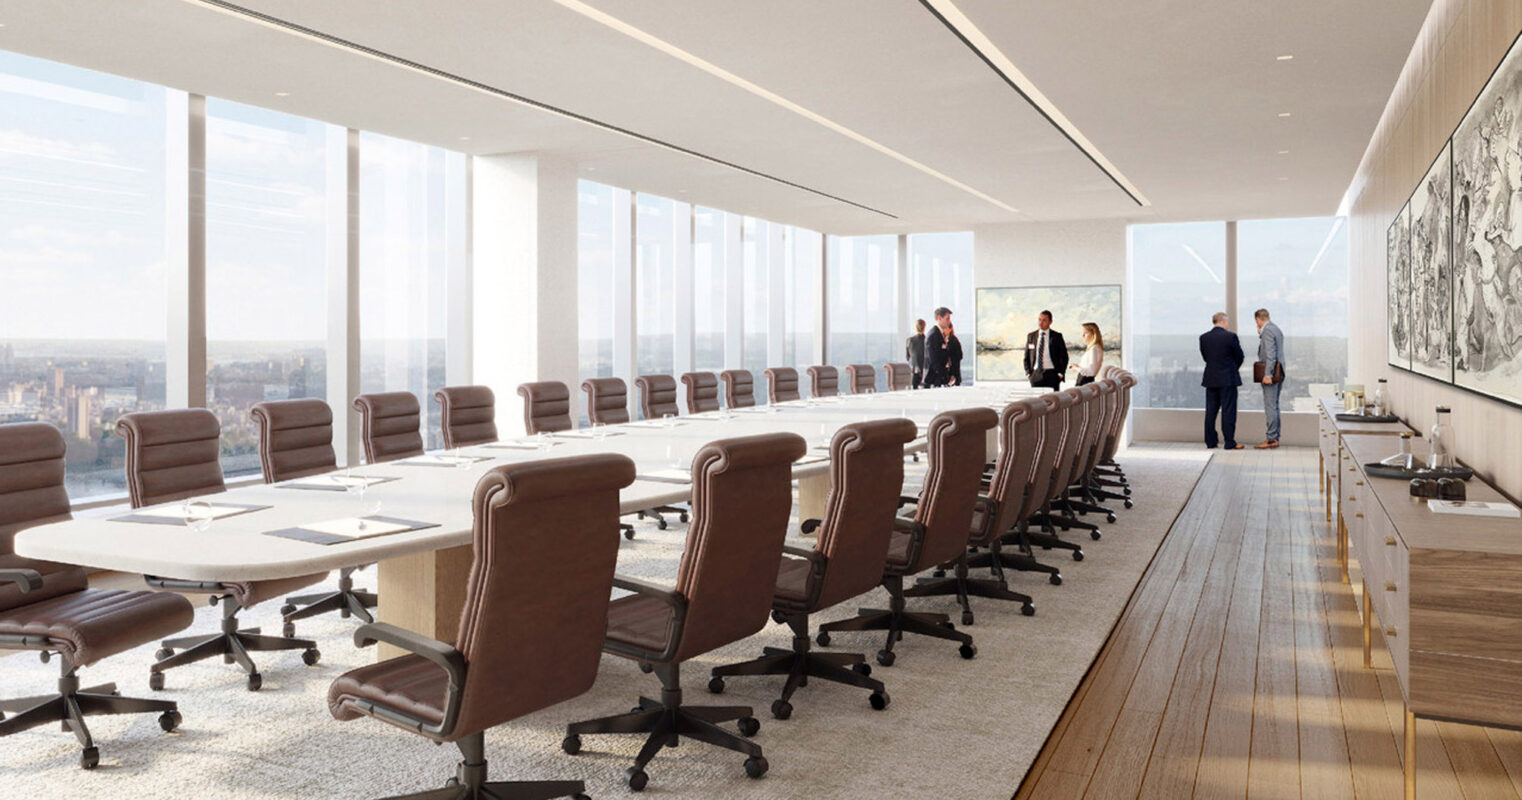 Spacious boardroom featuring floor-to-ceiling windows with panoramic city views, a long rectangular table, leather chairs, and a minimalist wood-panelled wall with integrated artwork. Natural light bathes the modern, professional space while individuals converse in the background.